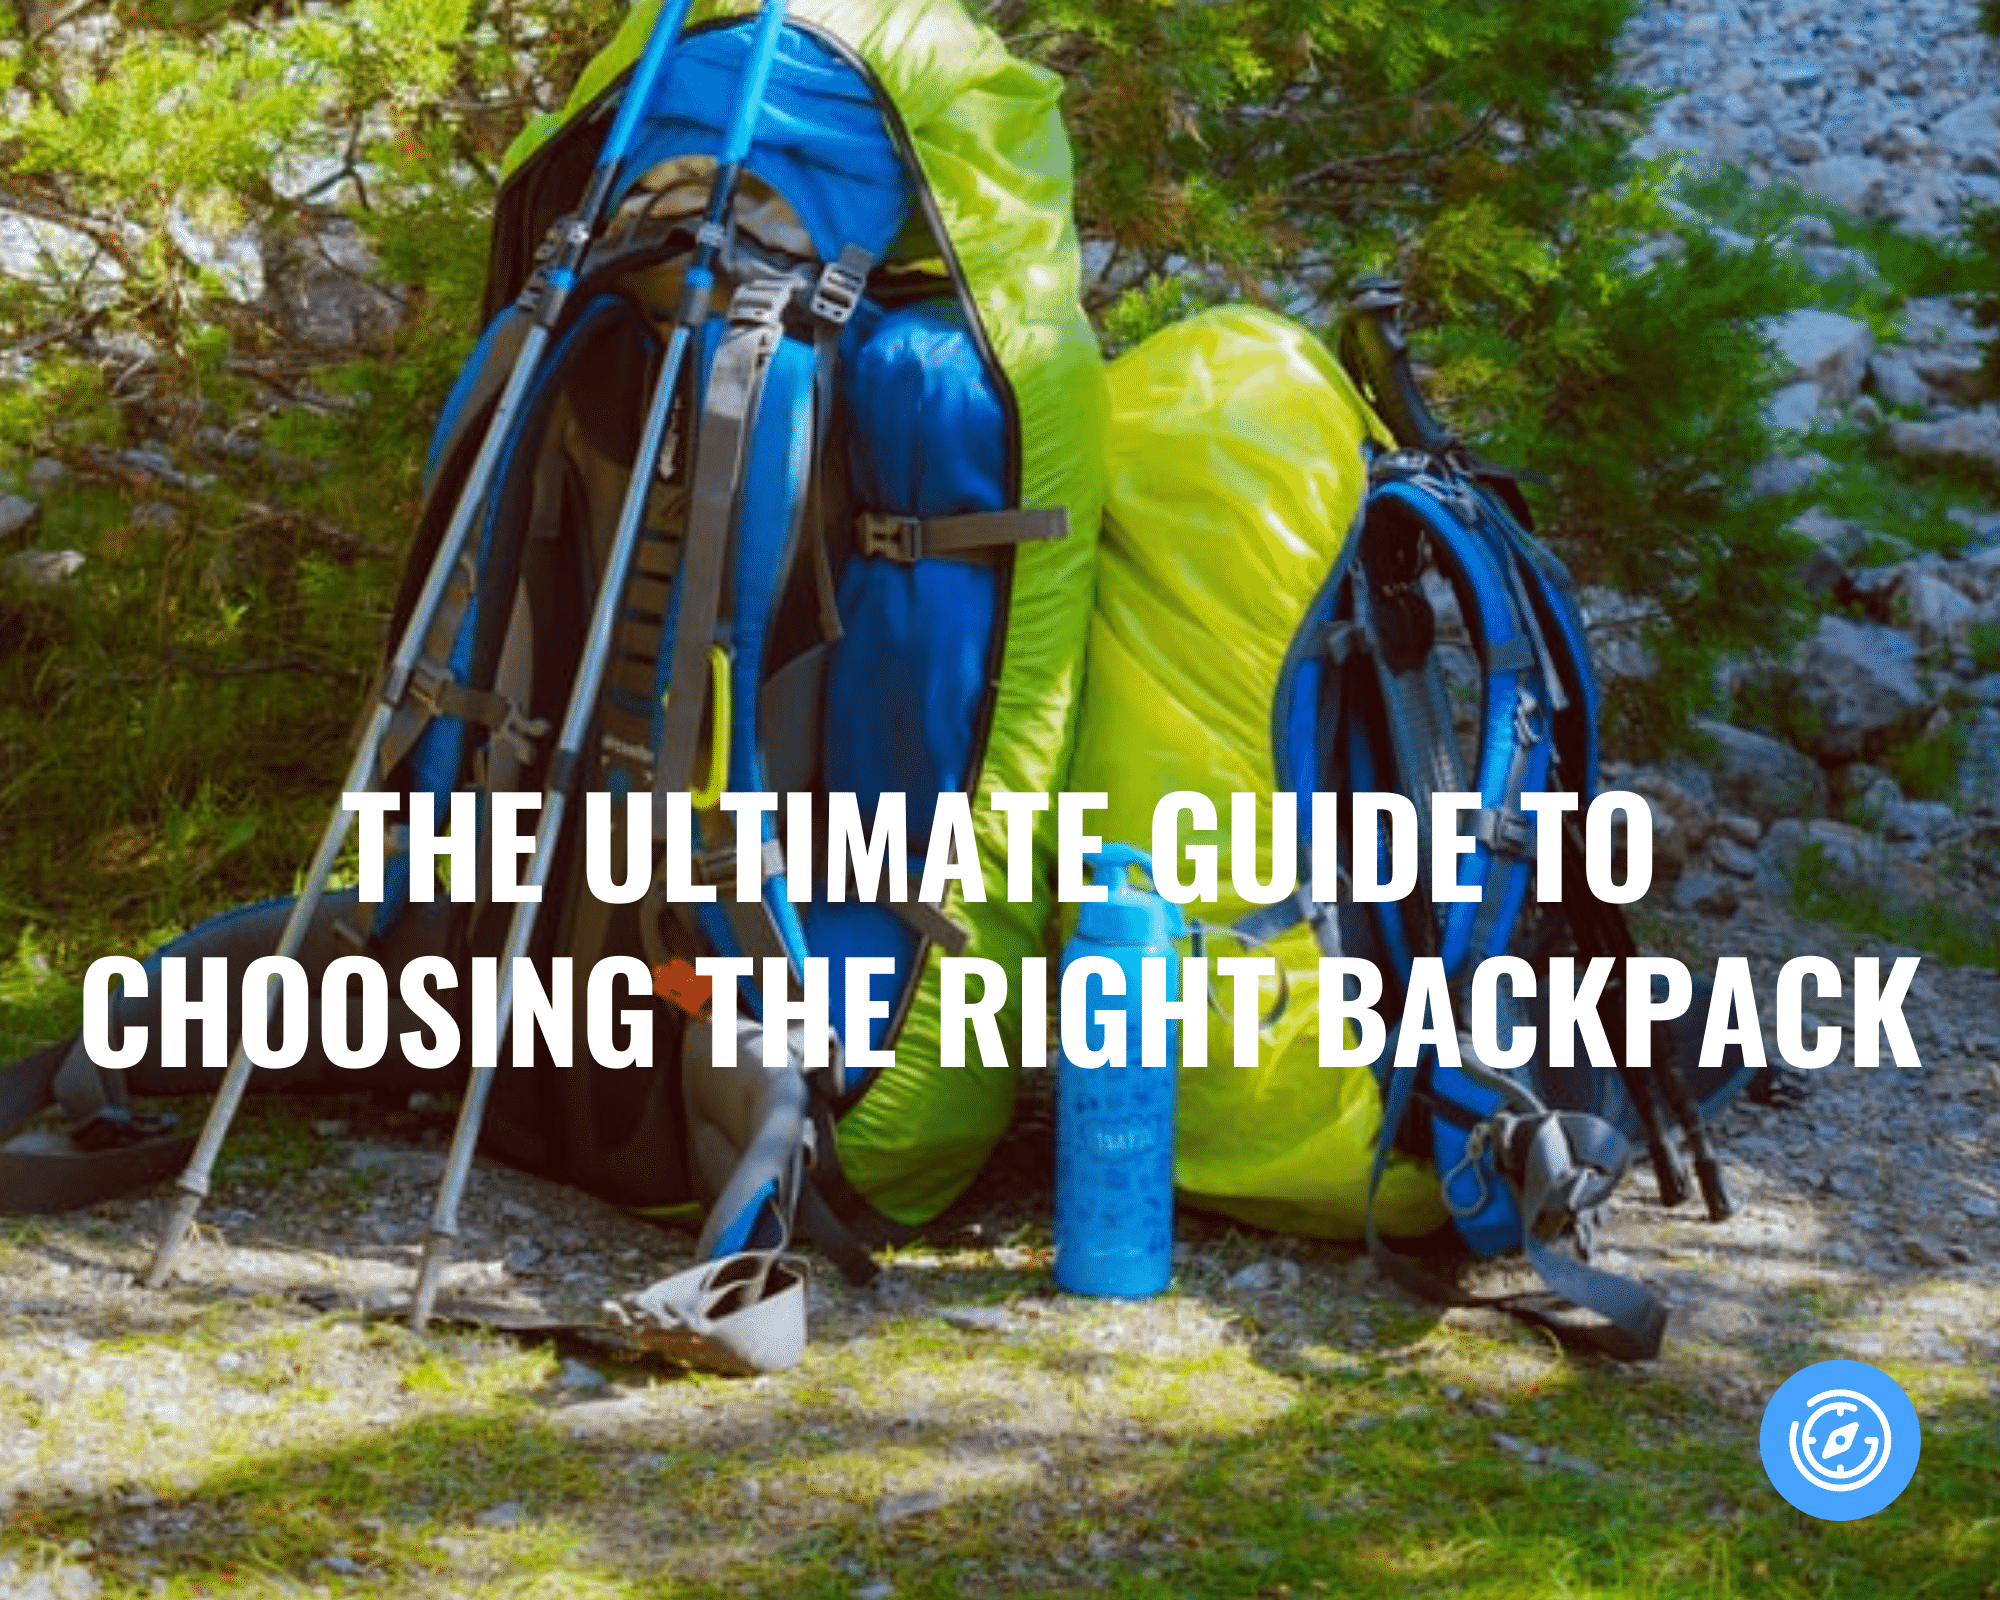 The Ultimate Guide to Choosing the Right Backpack